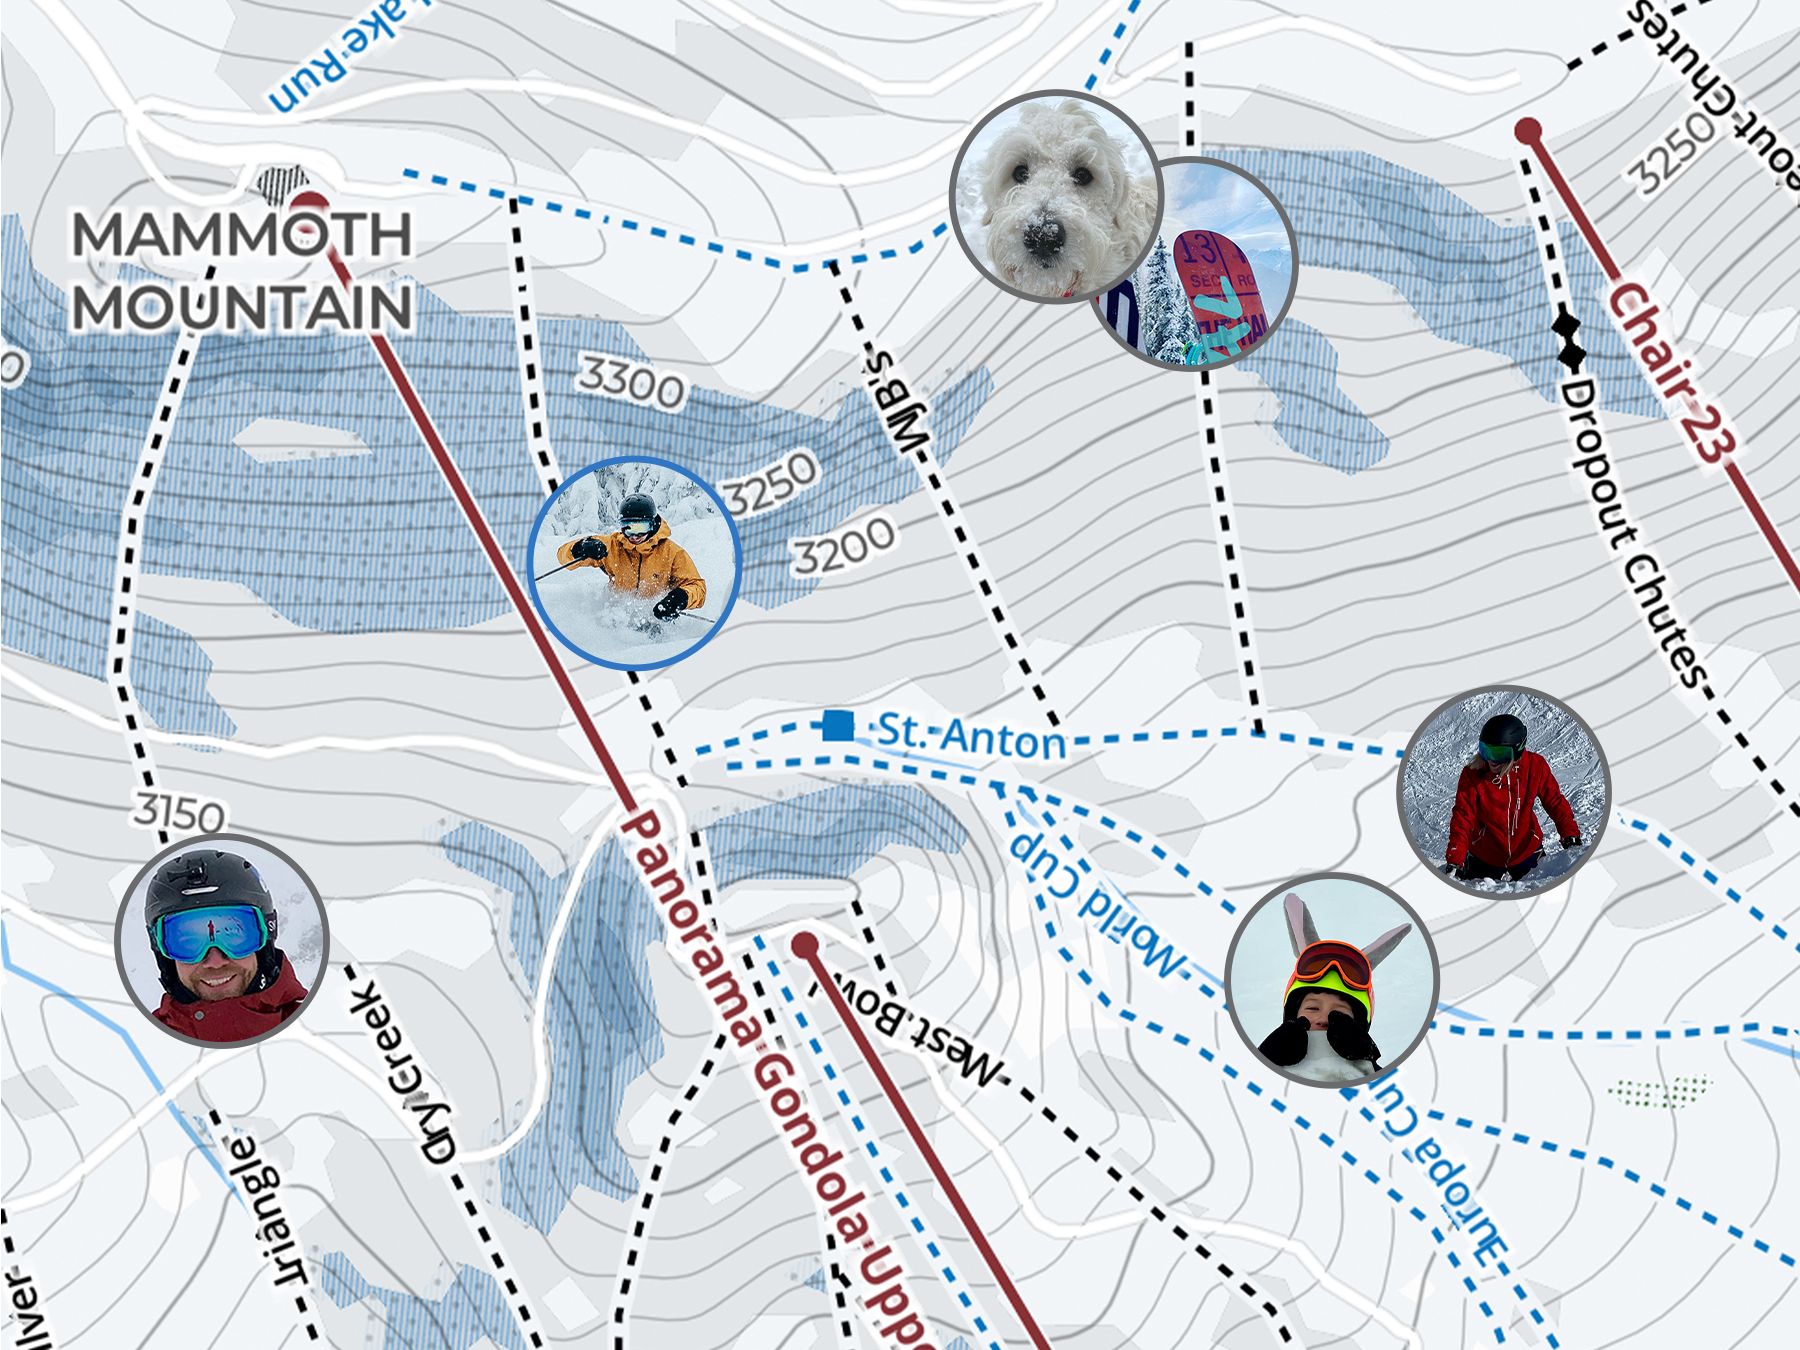 Ride on Interactive Ski Maps at over 350 Resorts Worldwide